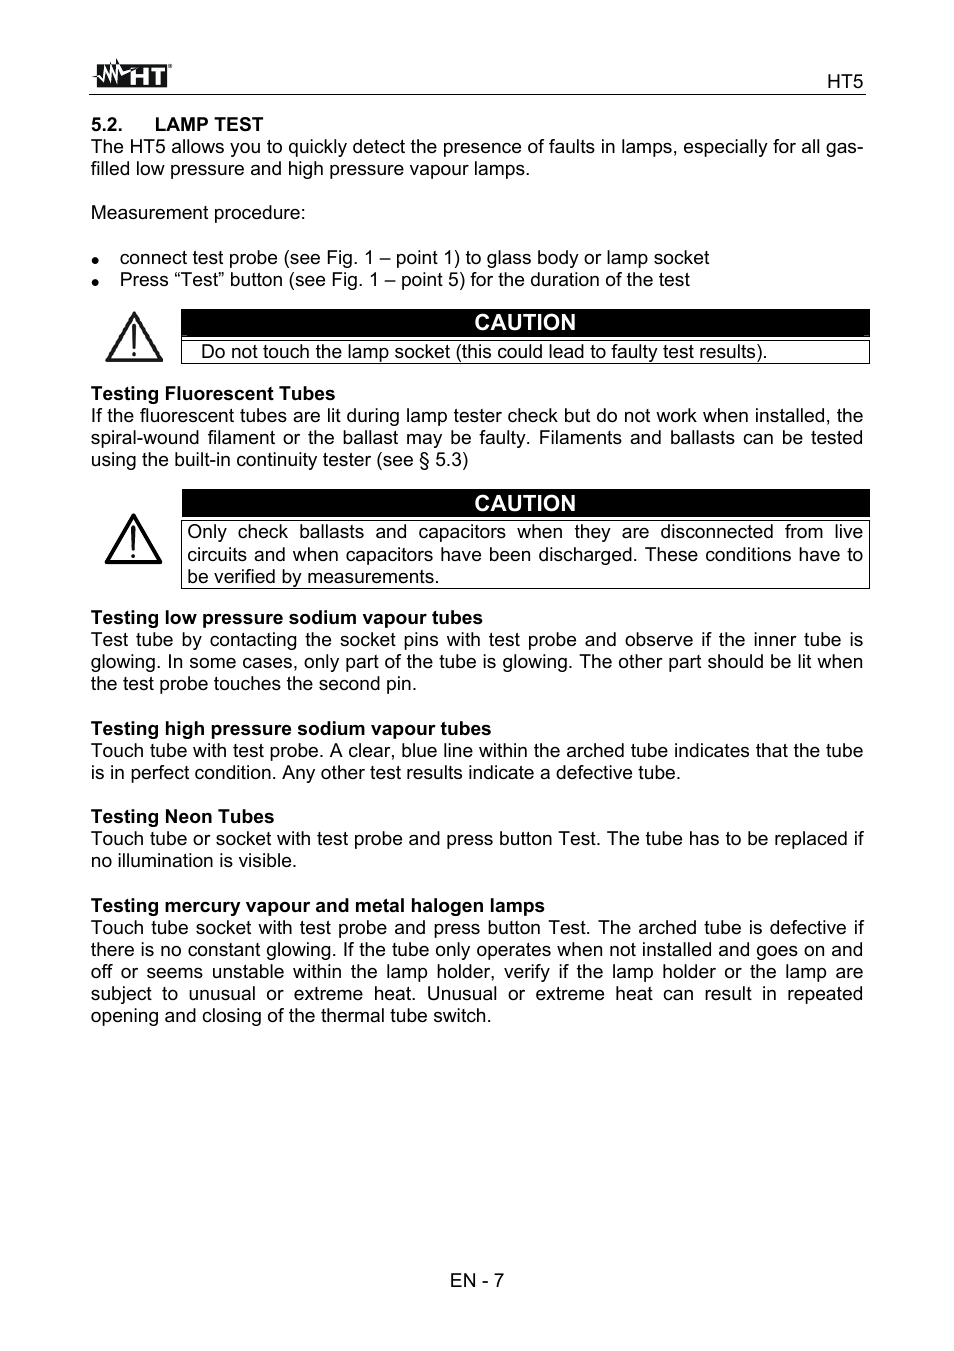 Caution | HT instruments HT5 User Manual | Page 8 / 12